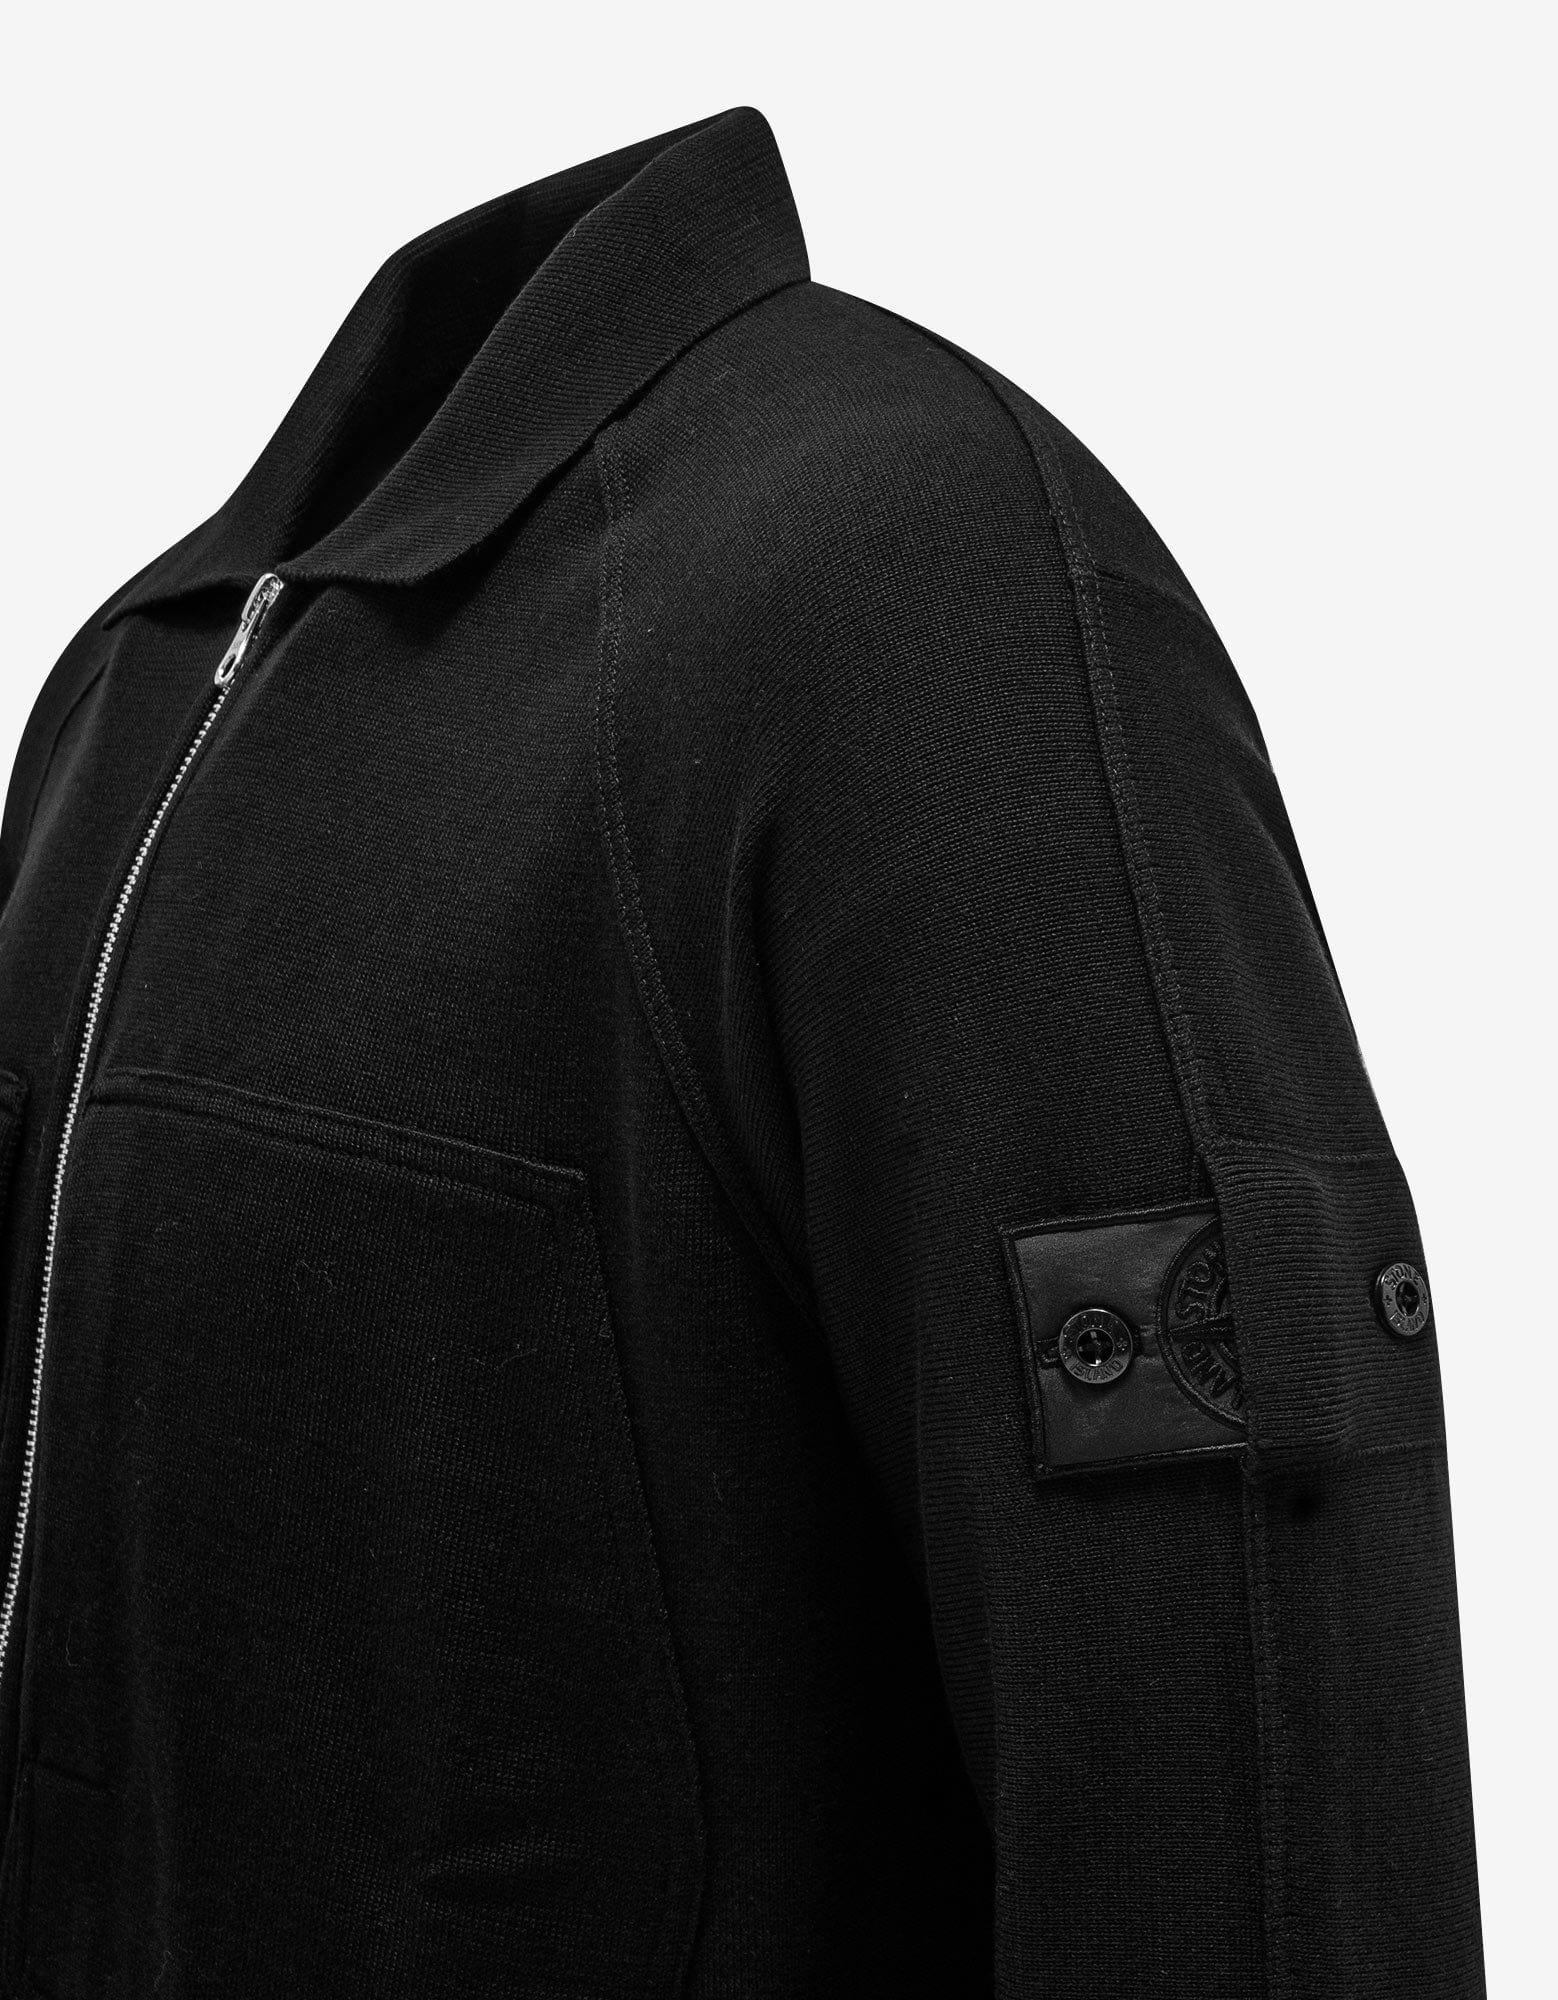 Stone Island Shadow Project Black Chest Pocket Zip Cardigan for Men | Lyst